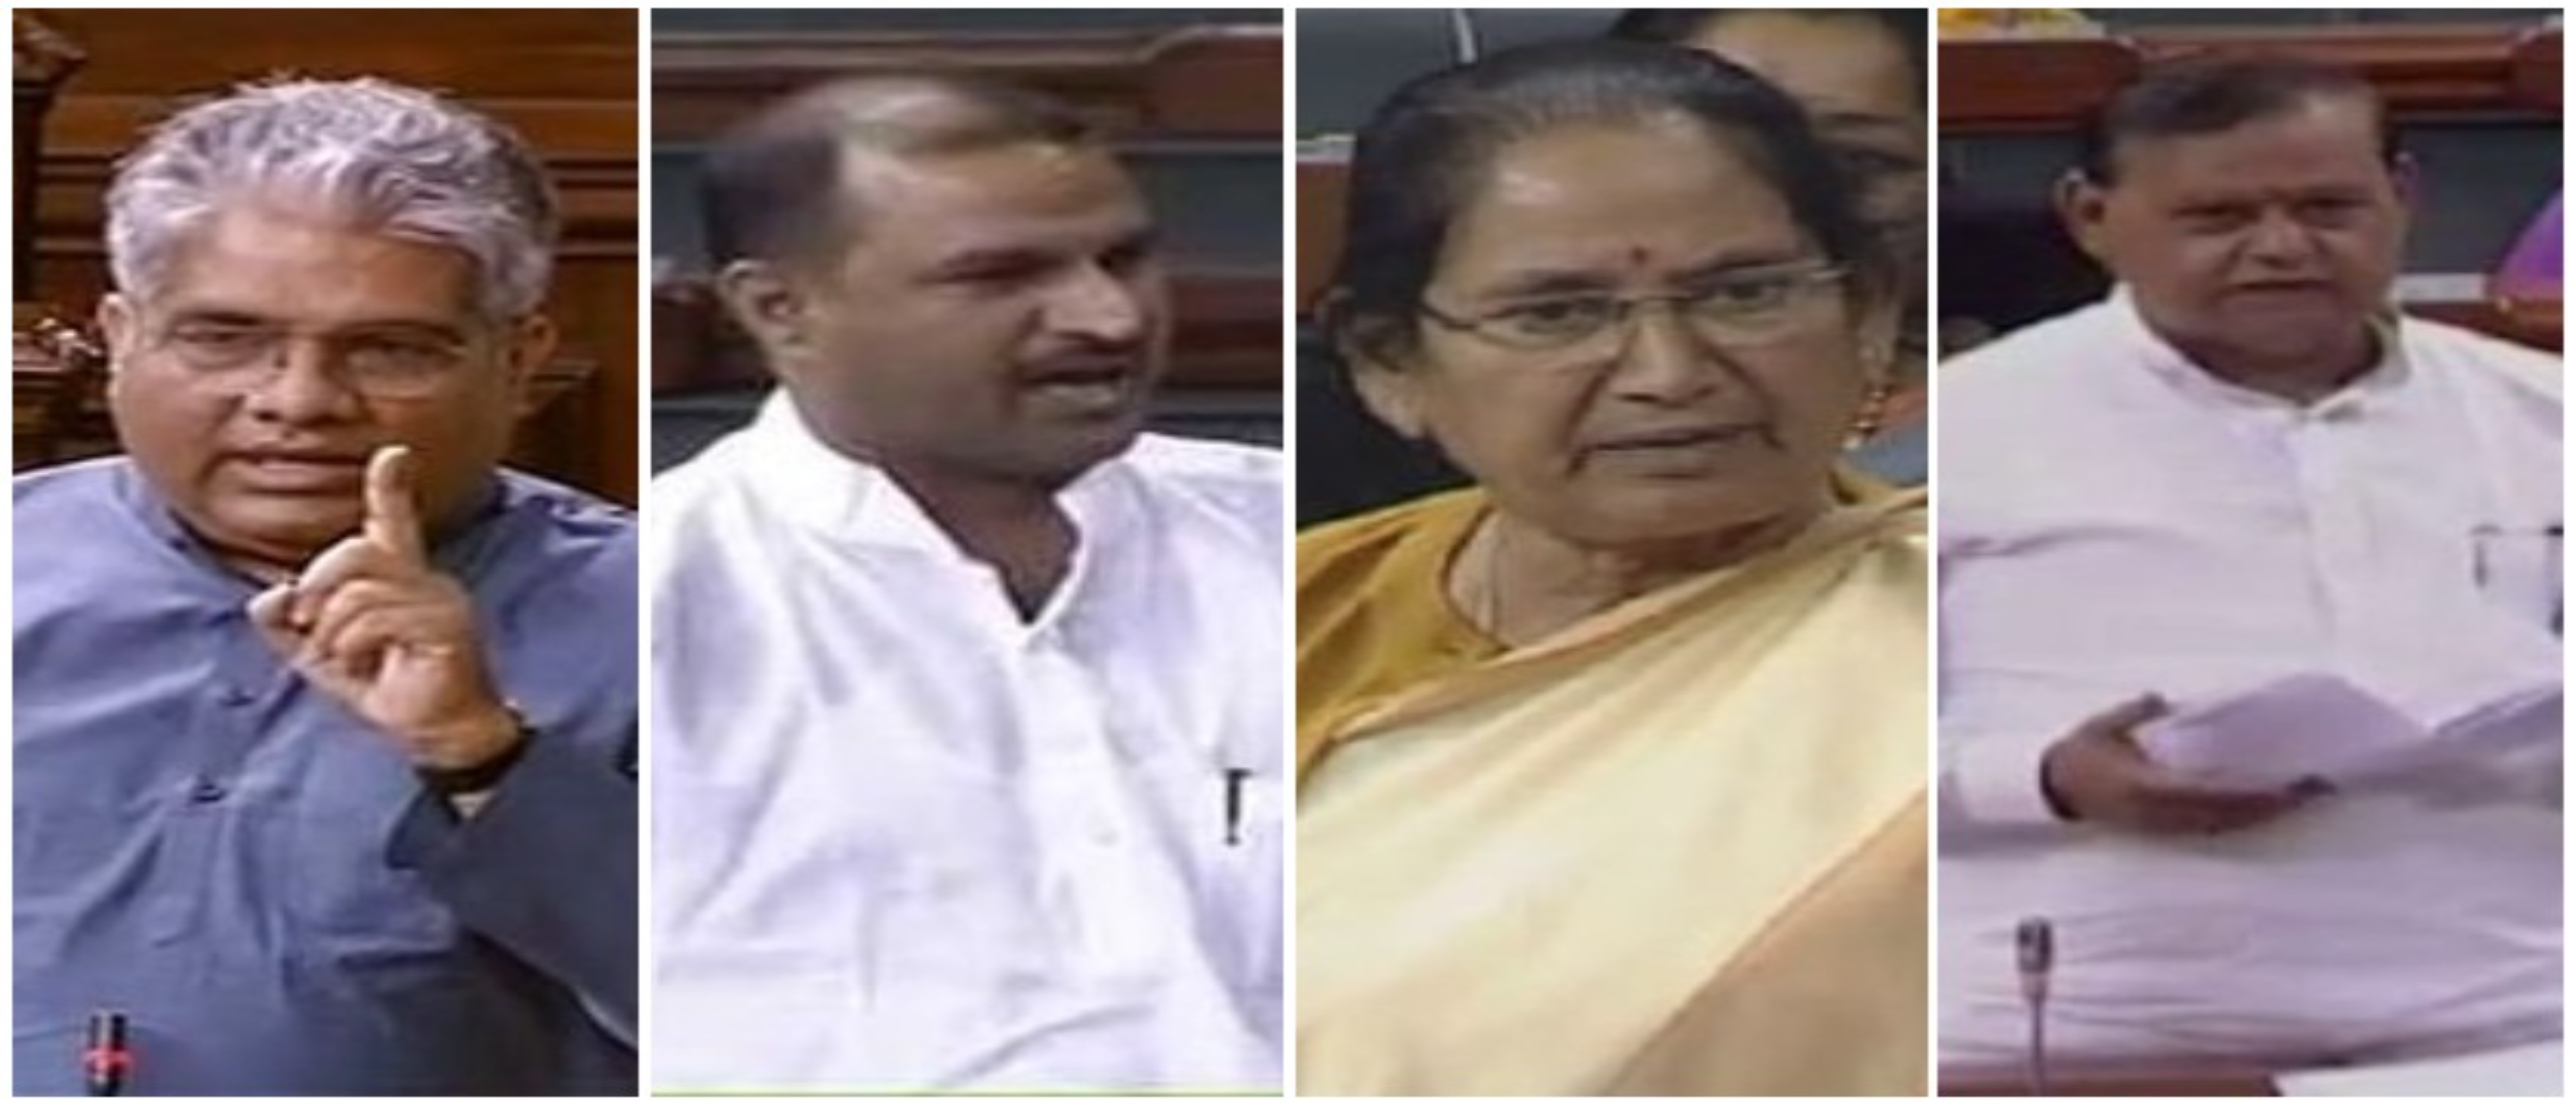 Rajasthan BJP MP raises state issue in Parliament